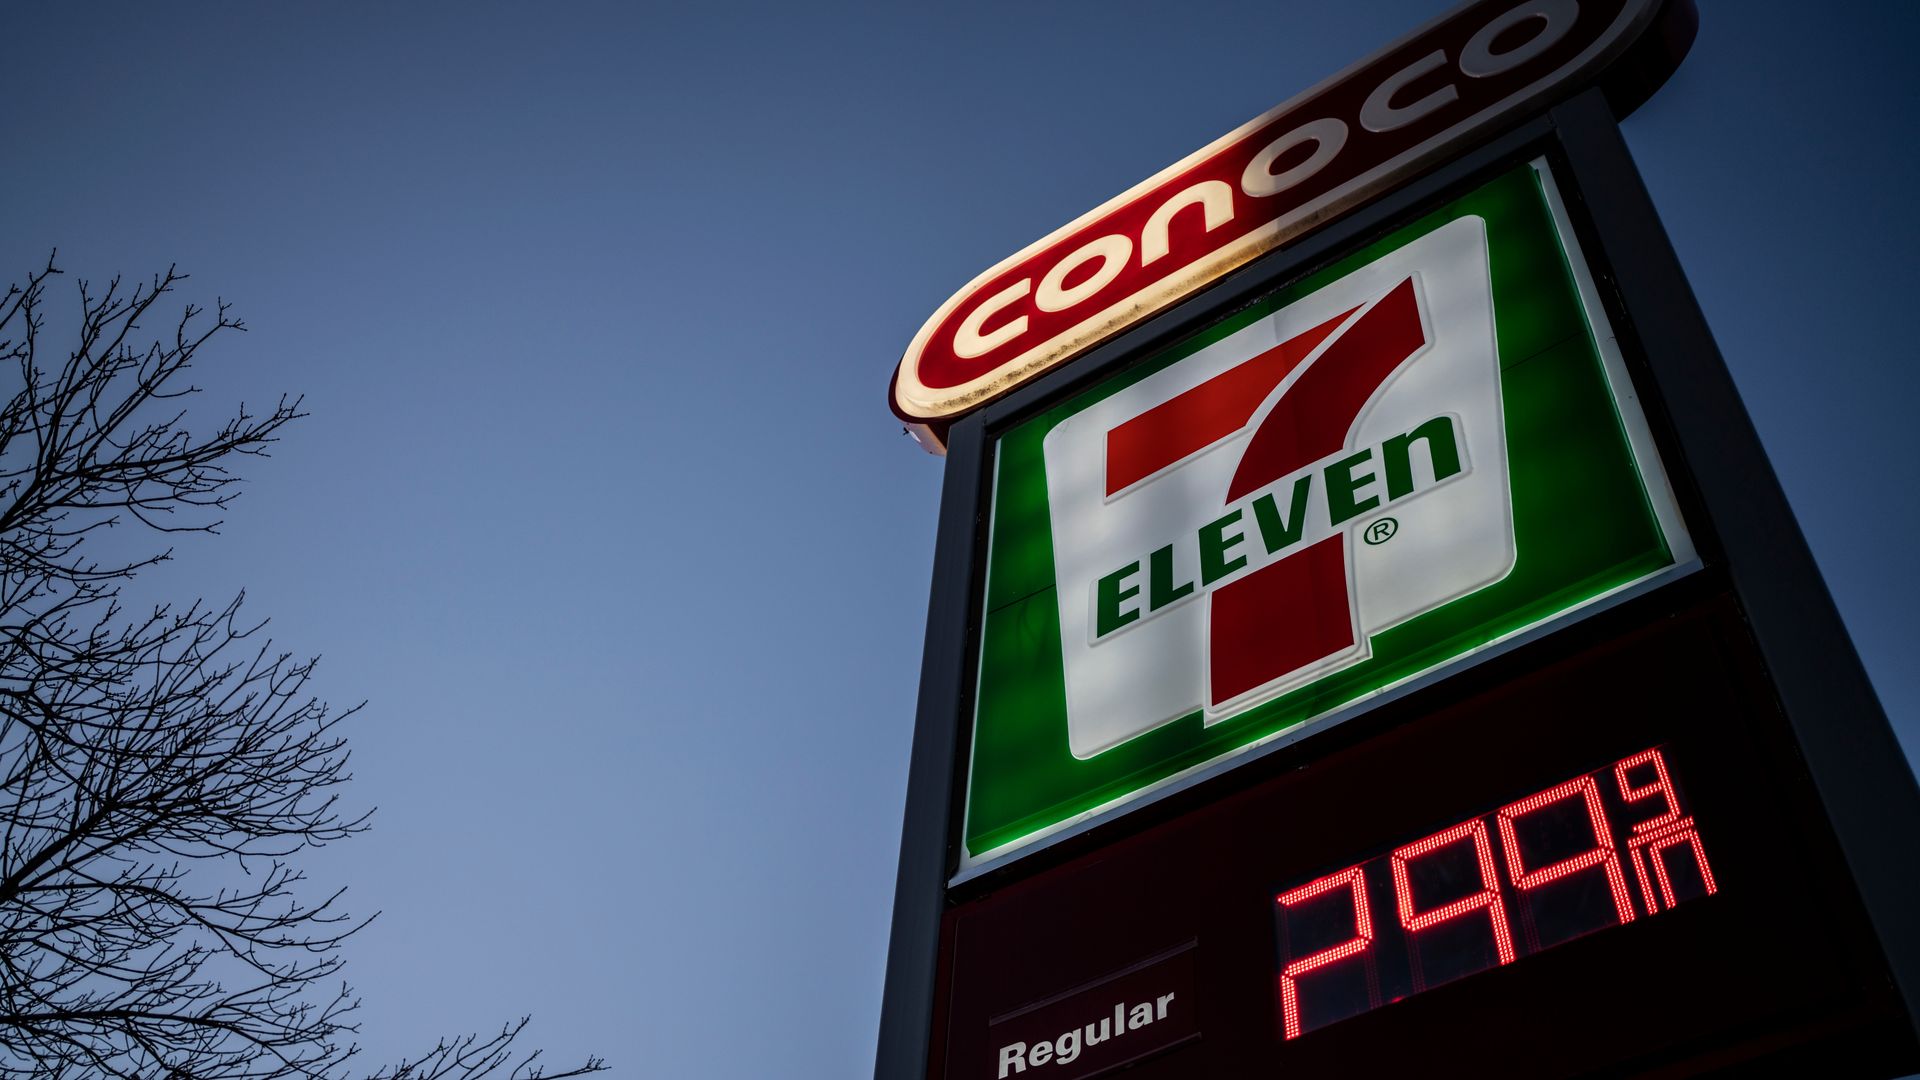 A Conoco gas station/7-eleven sign that advertises regular gas for 2.99, as seen from below at dusk